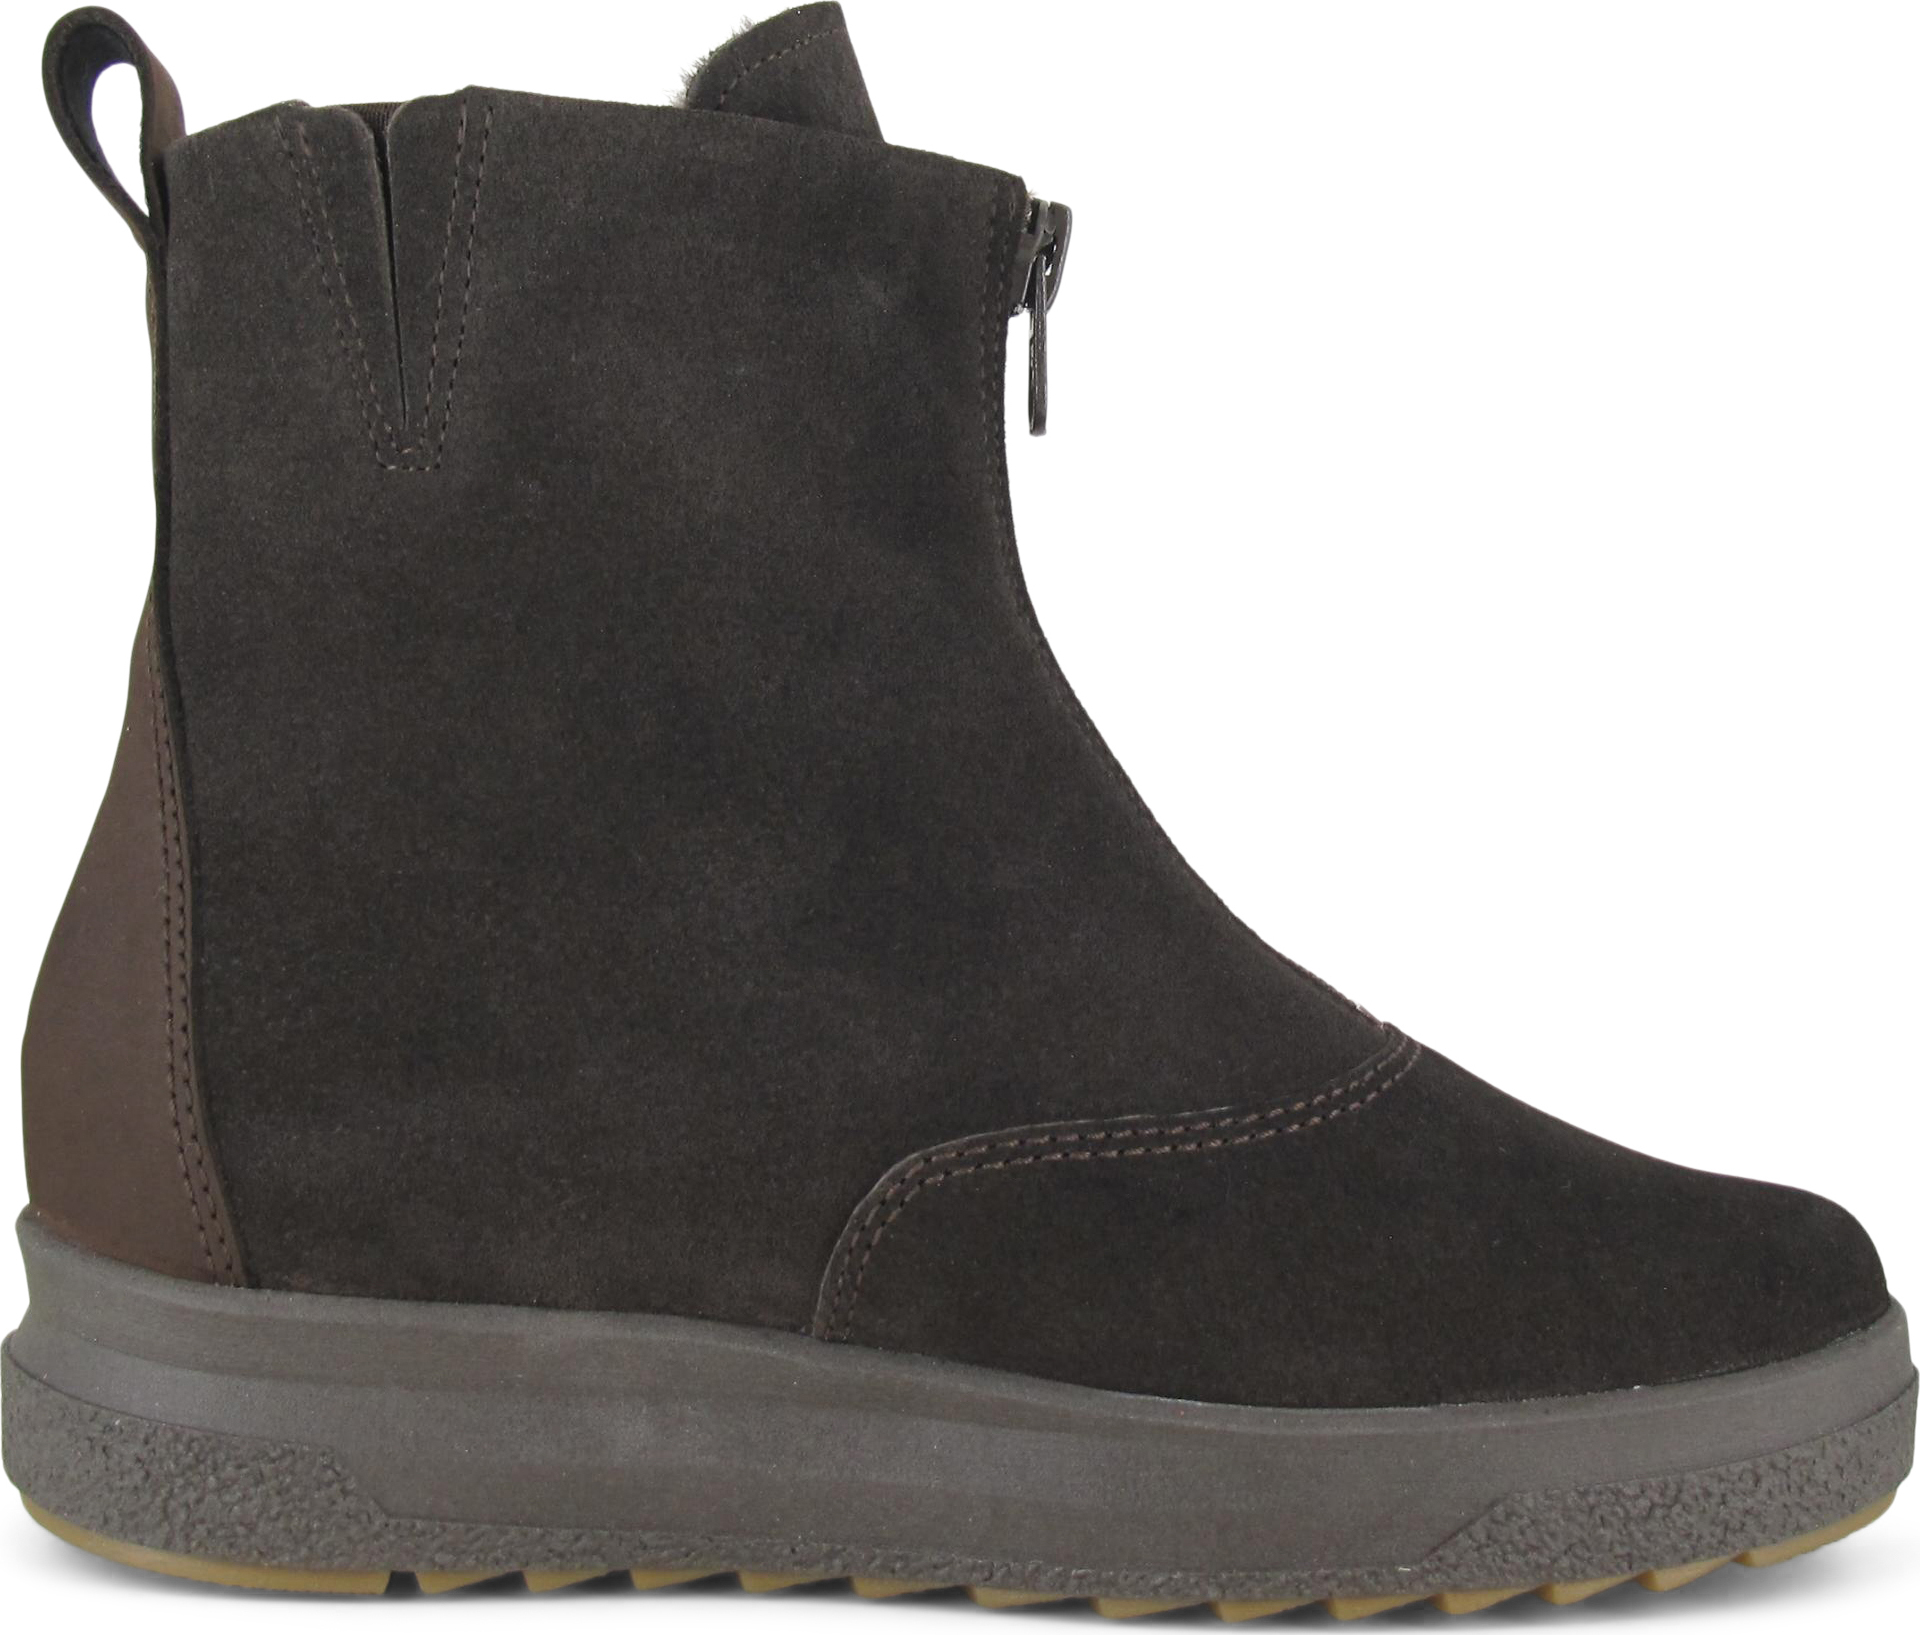 Women's Uurre Gore-Tex Ankle Boot Bark Suede/Waxy/Fur (Bark S)